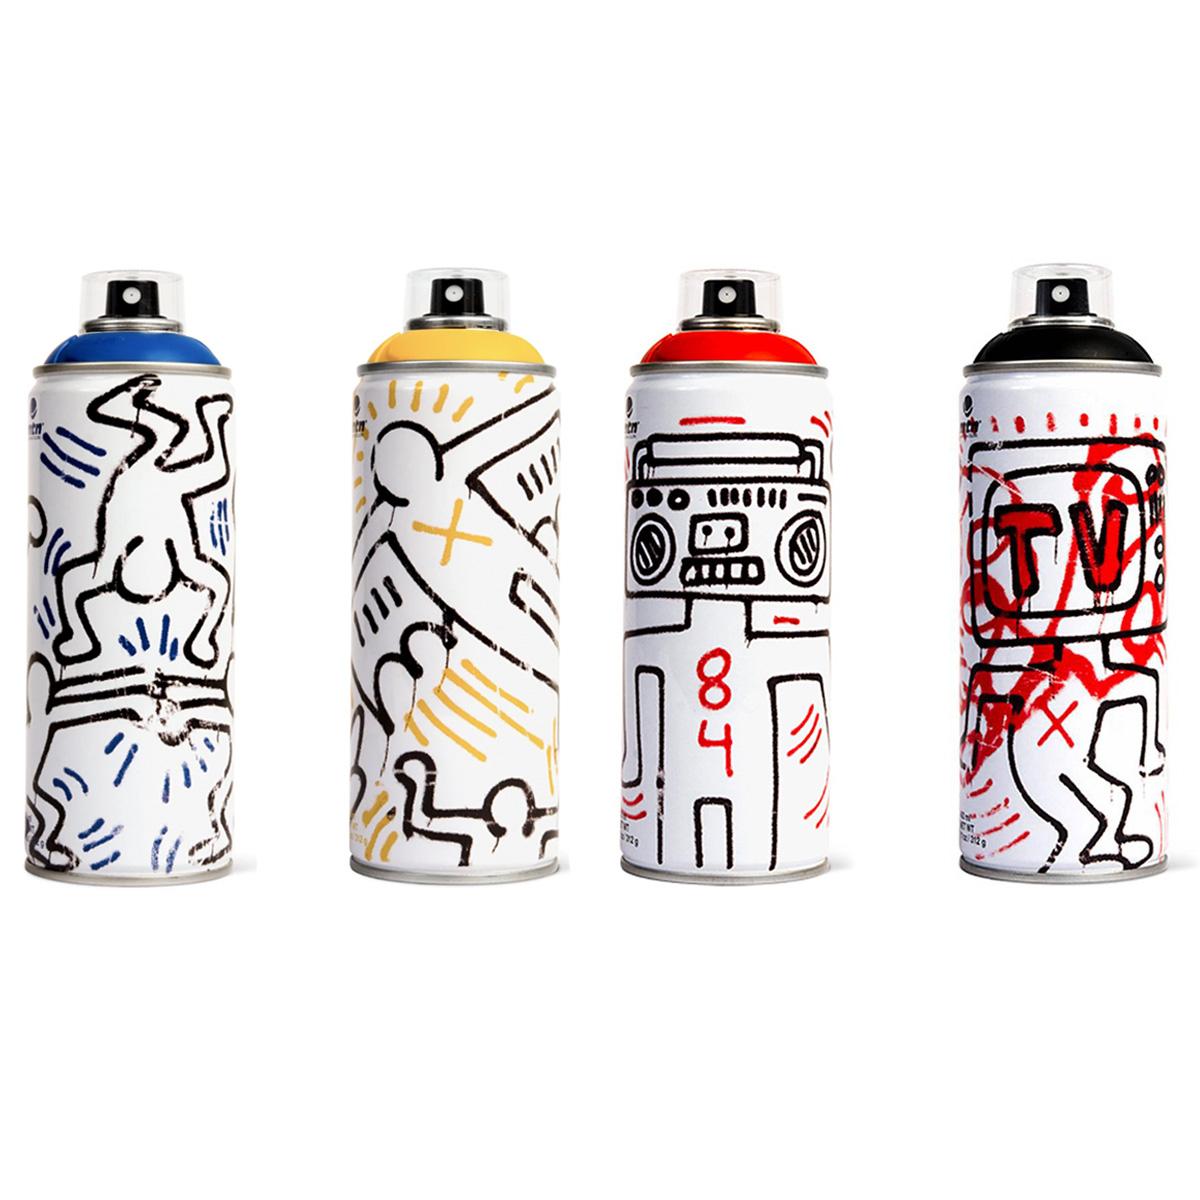 Limited edition Keith Haring spray paint can set - Print by (after) Keith Haring